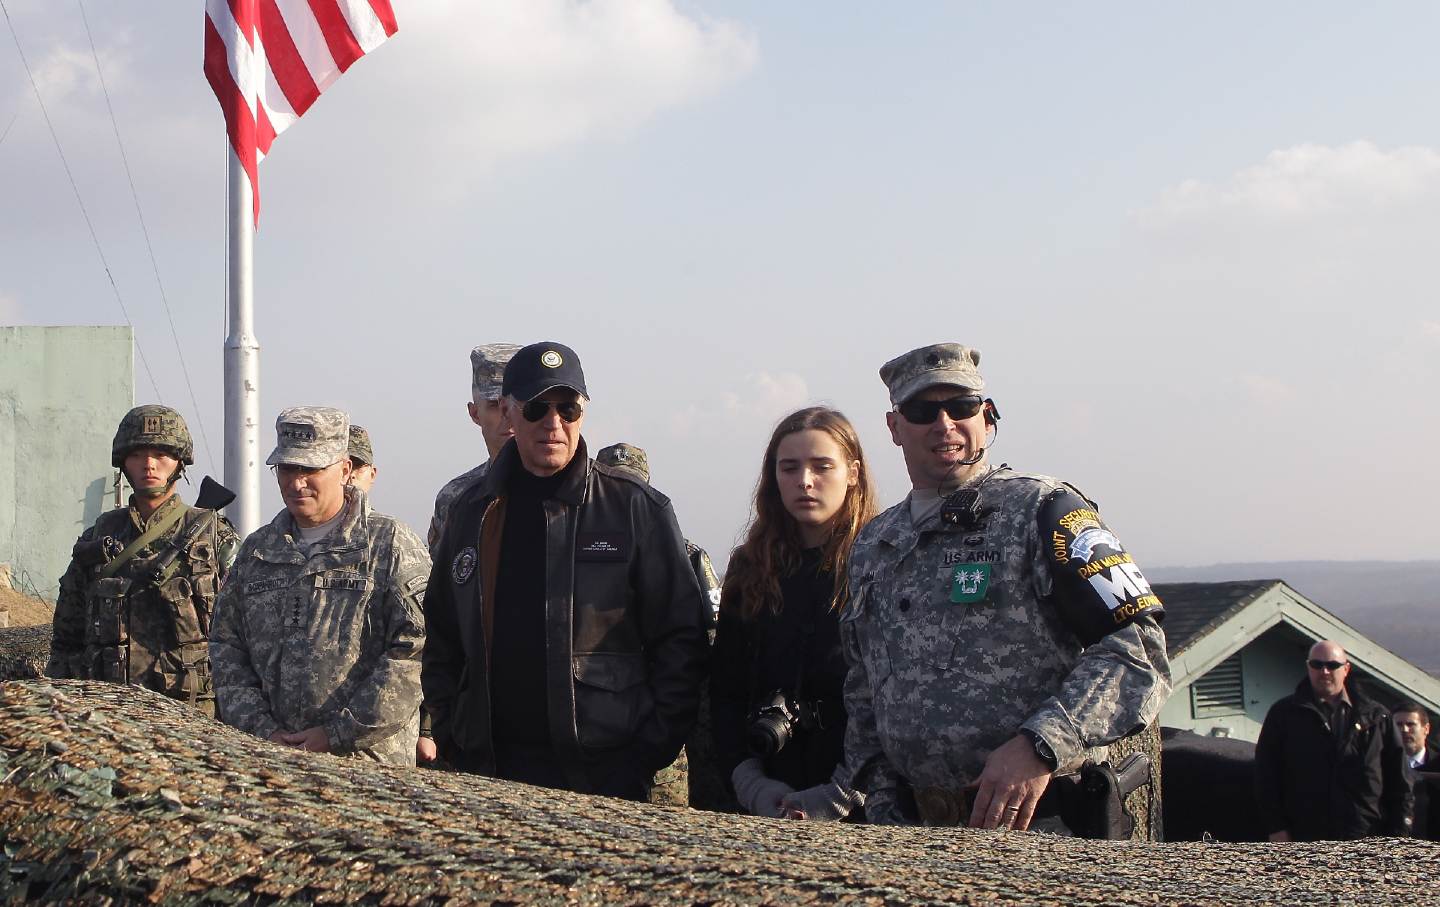 Joe Biden stands with his granddaughter and six soldiers at an Army post.